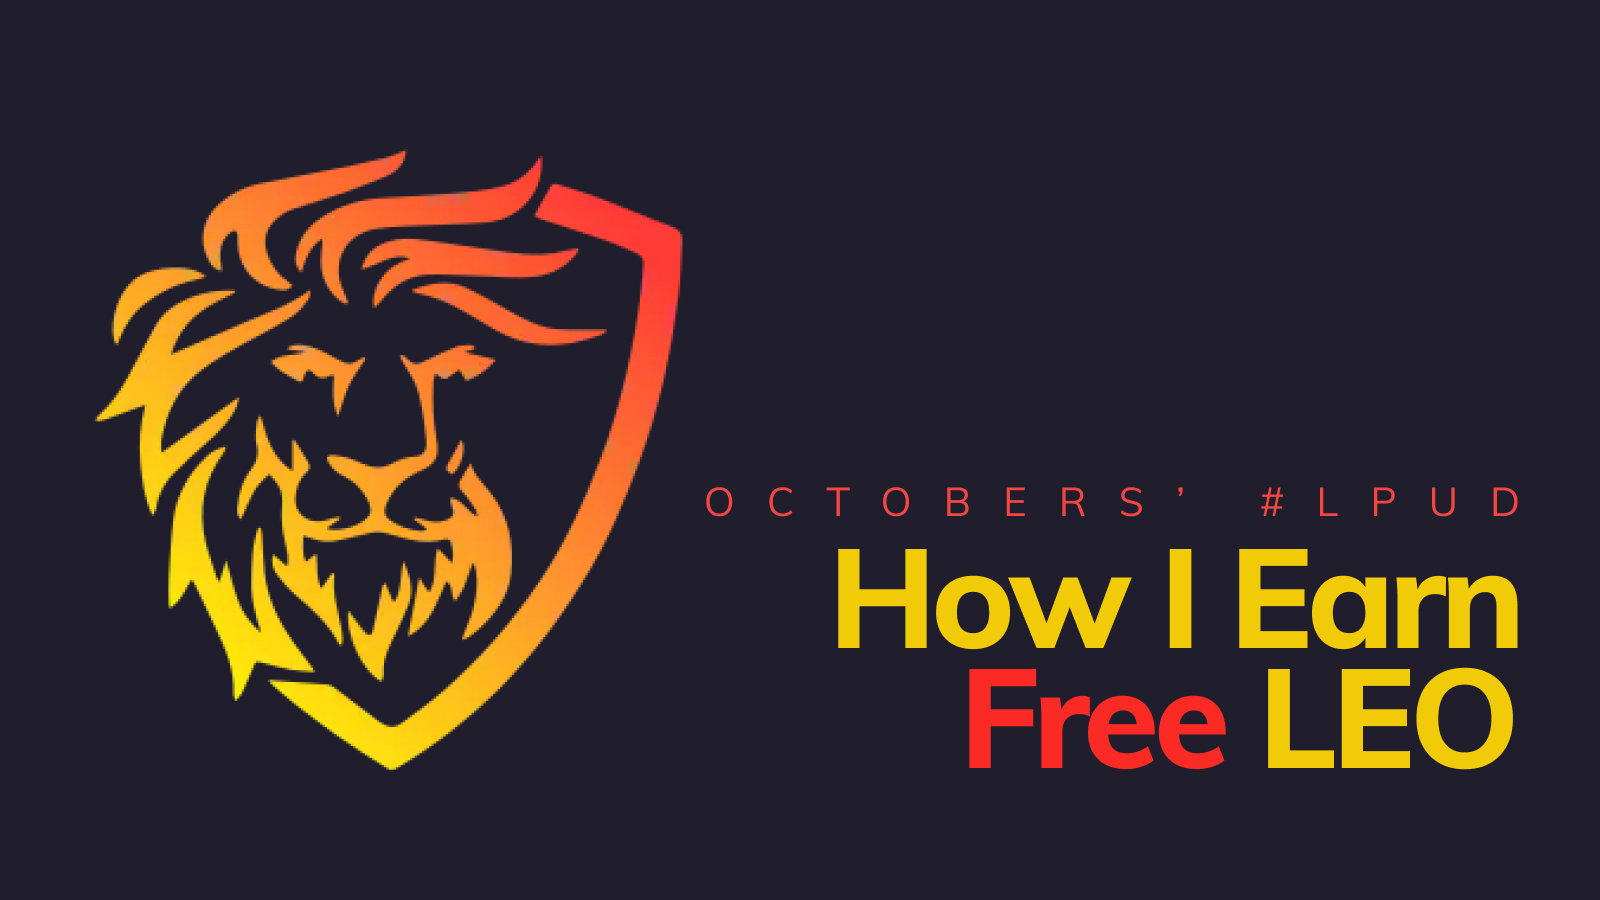 @thecuriousfool/how-i-earn-my-free-leo-for-october-s-lpud-leo-power-up-day